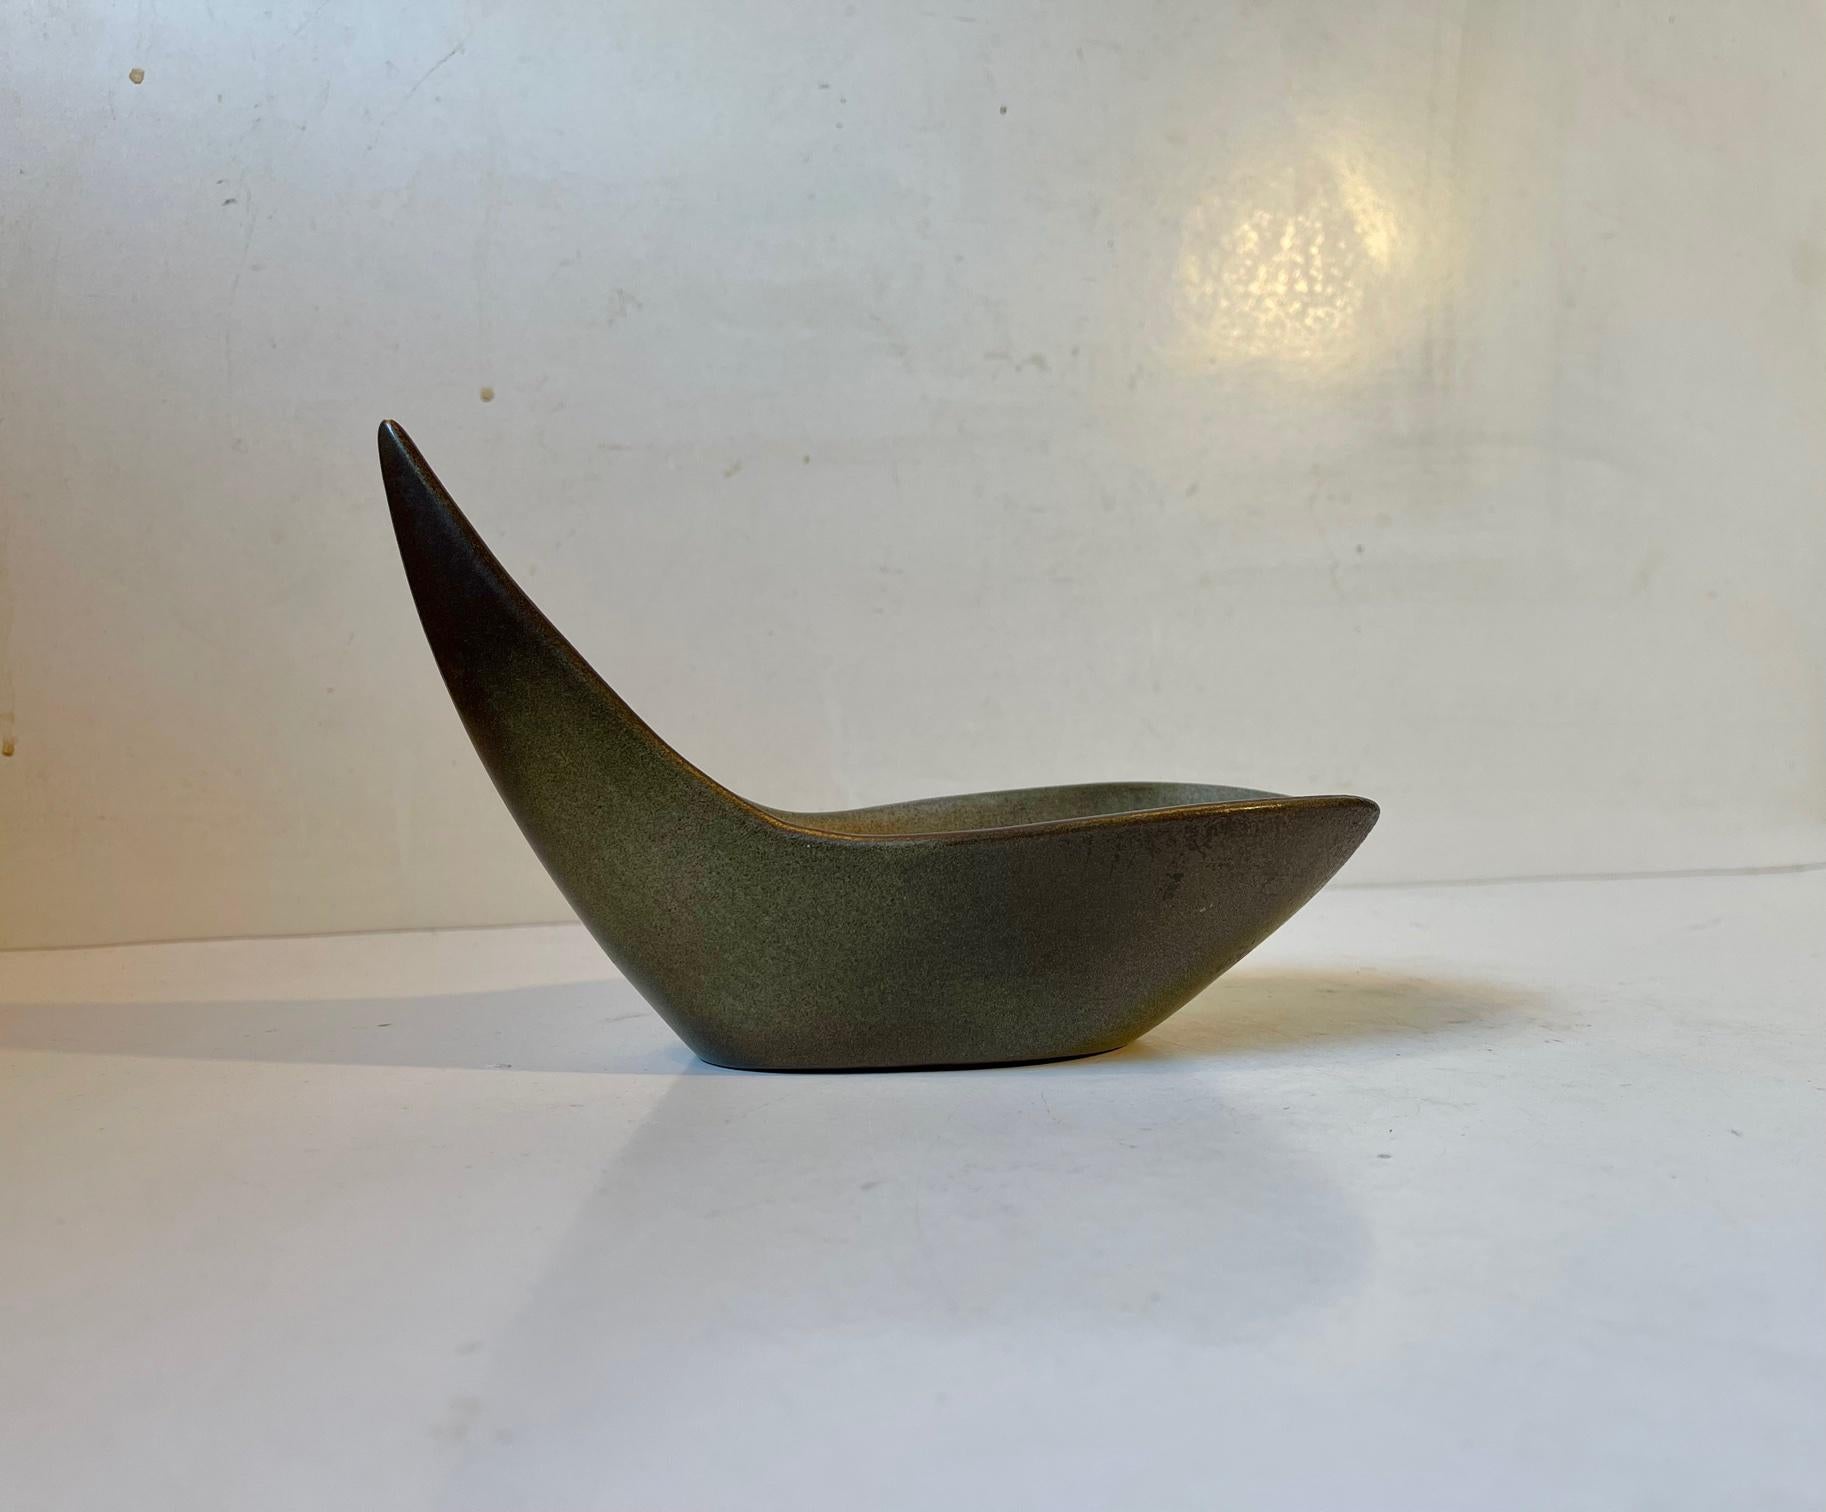 French Midcentury Ceramic Bowl by René Maurel, Vallauris School, 1950s For Sale